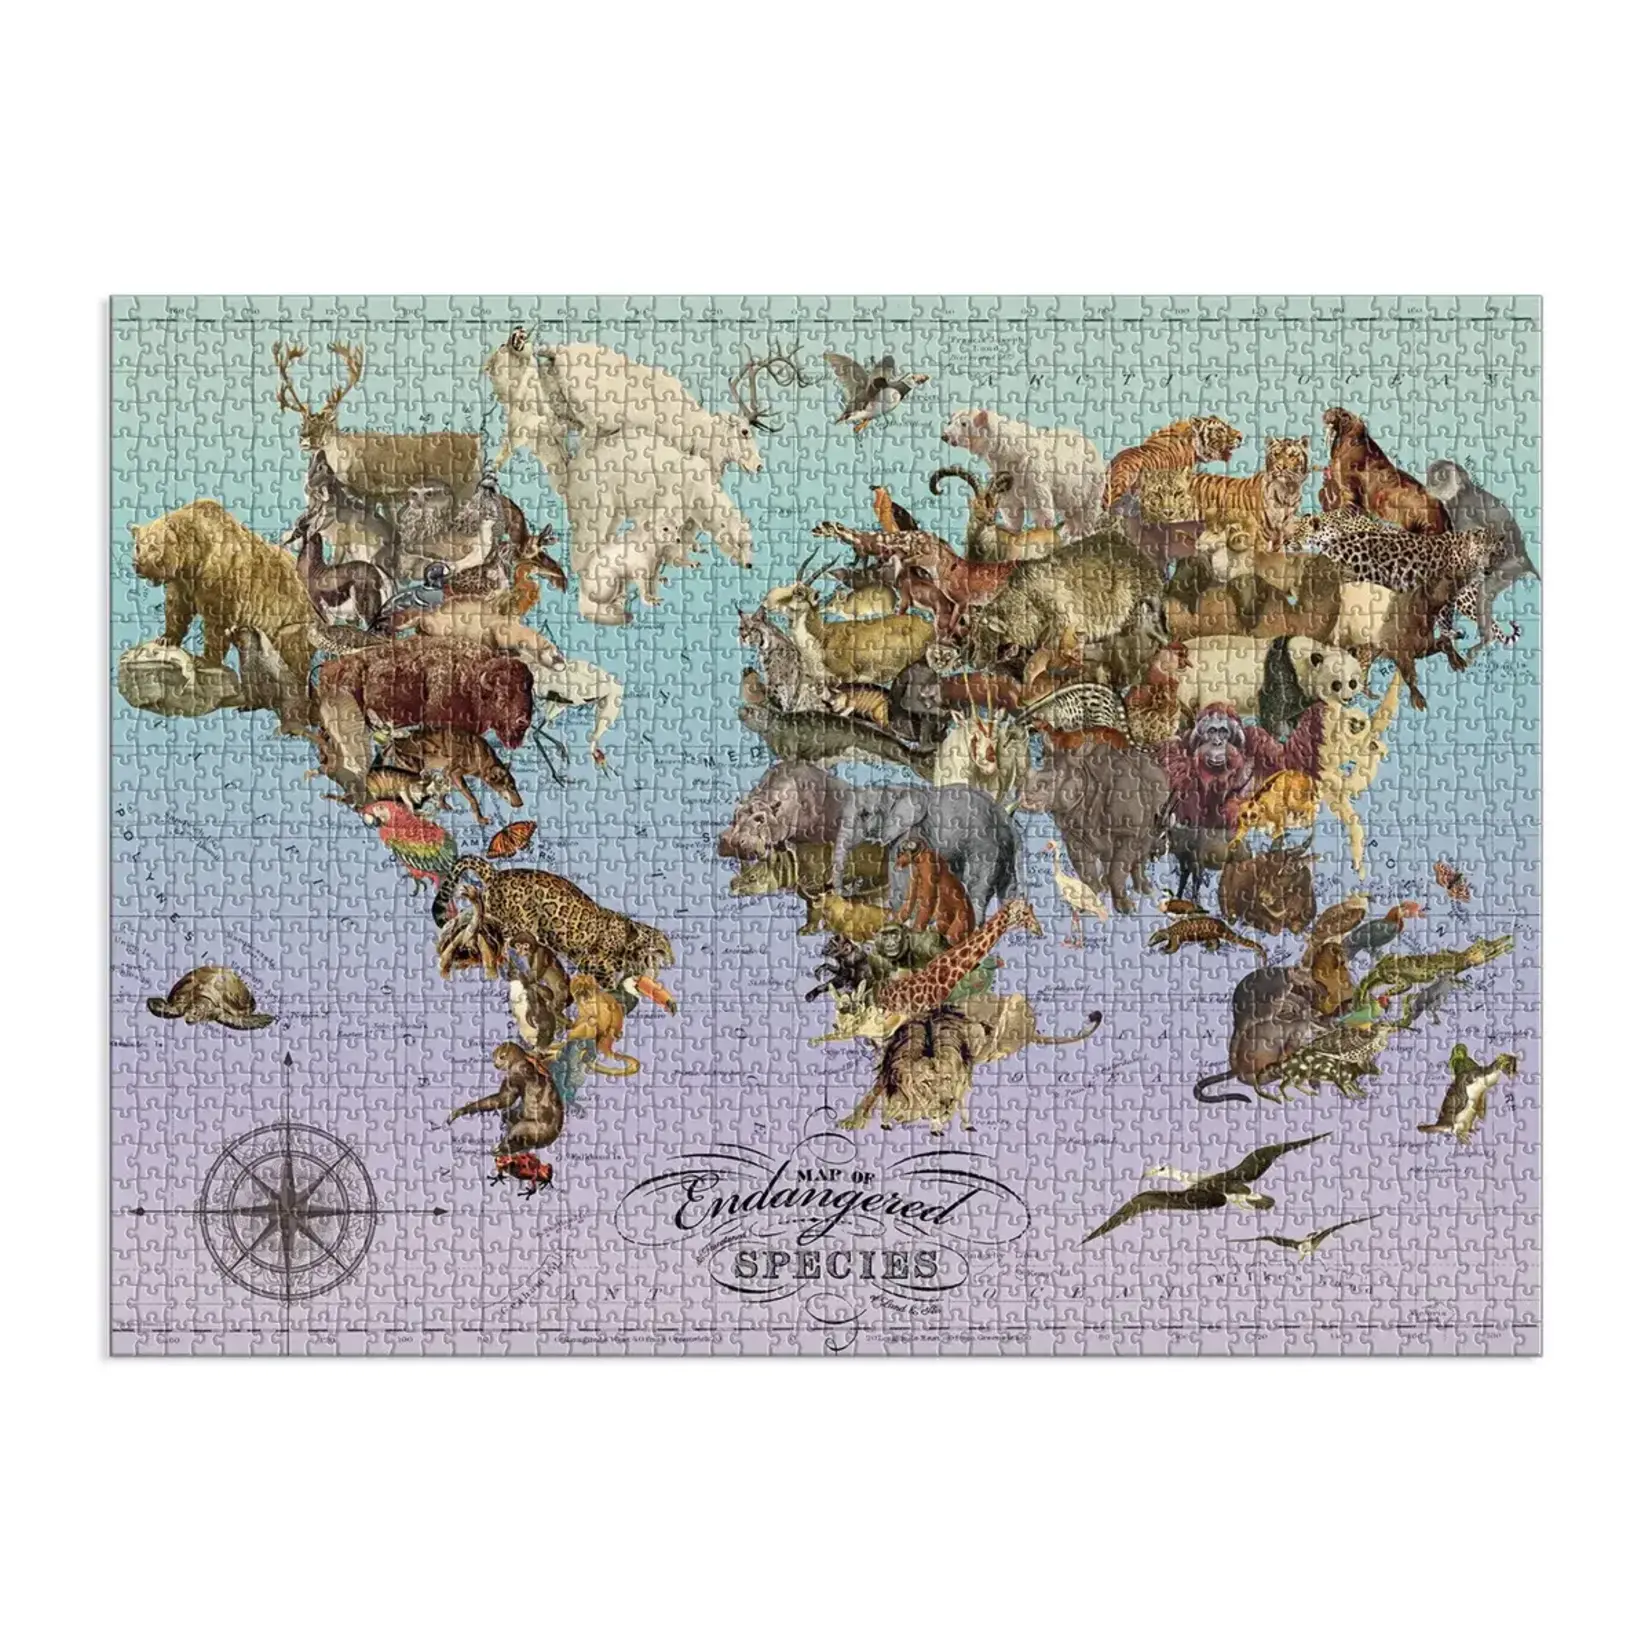 Galison Endangered Species by Wendy Gold, 1500-Piece Jigsaw Puzzle